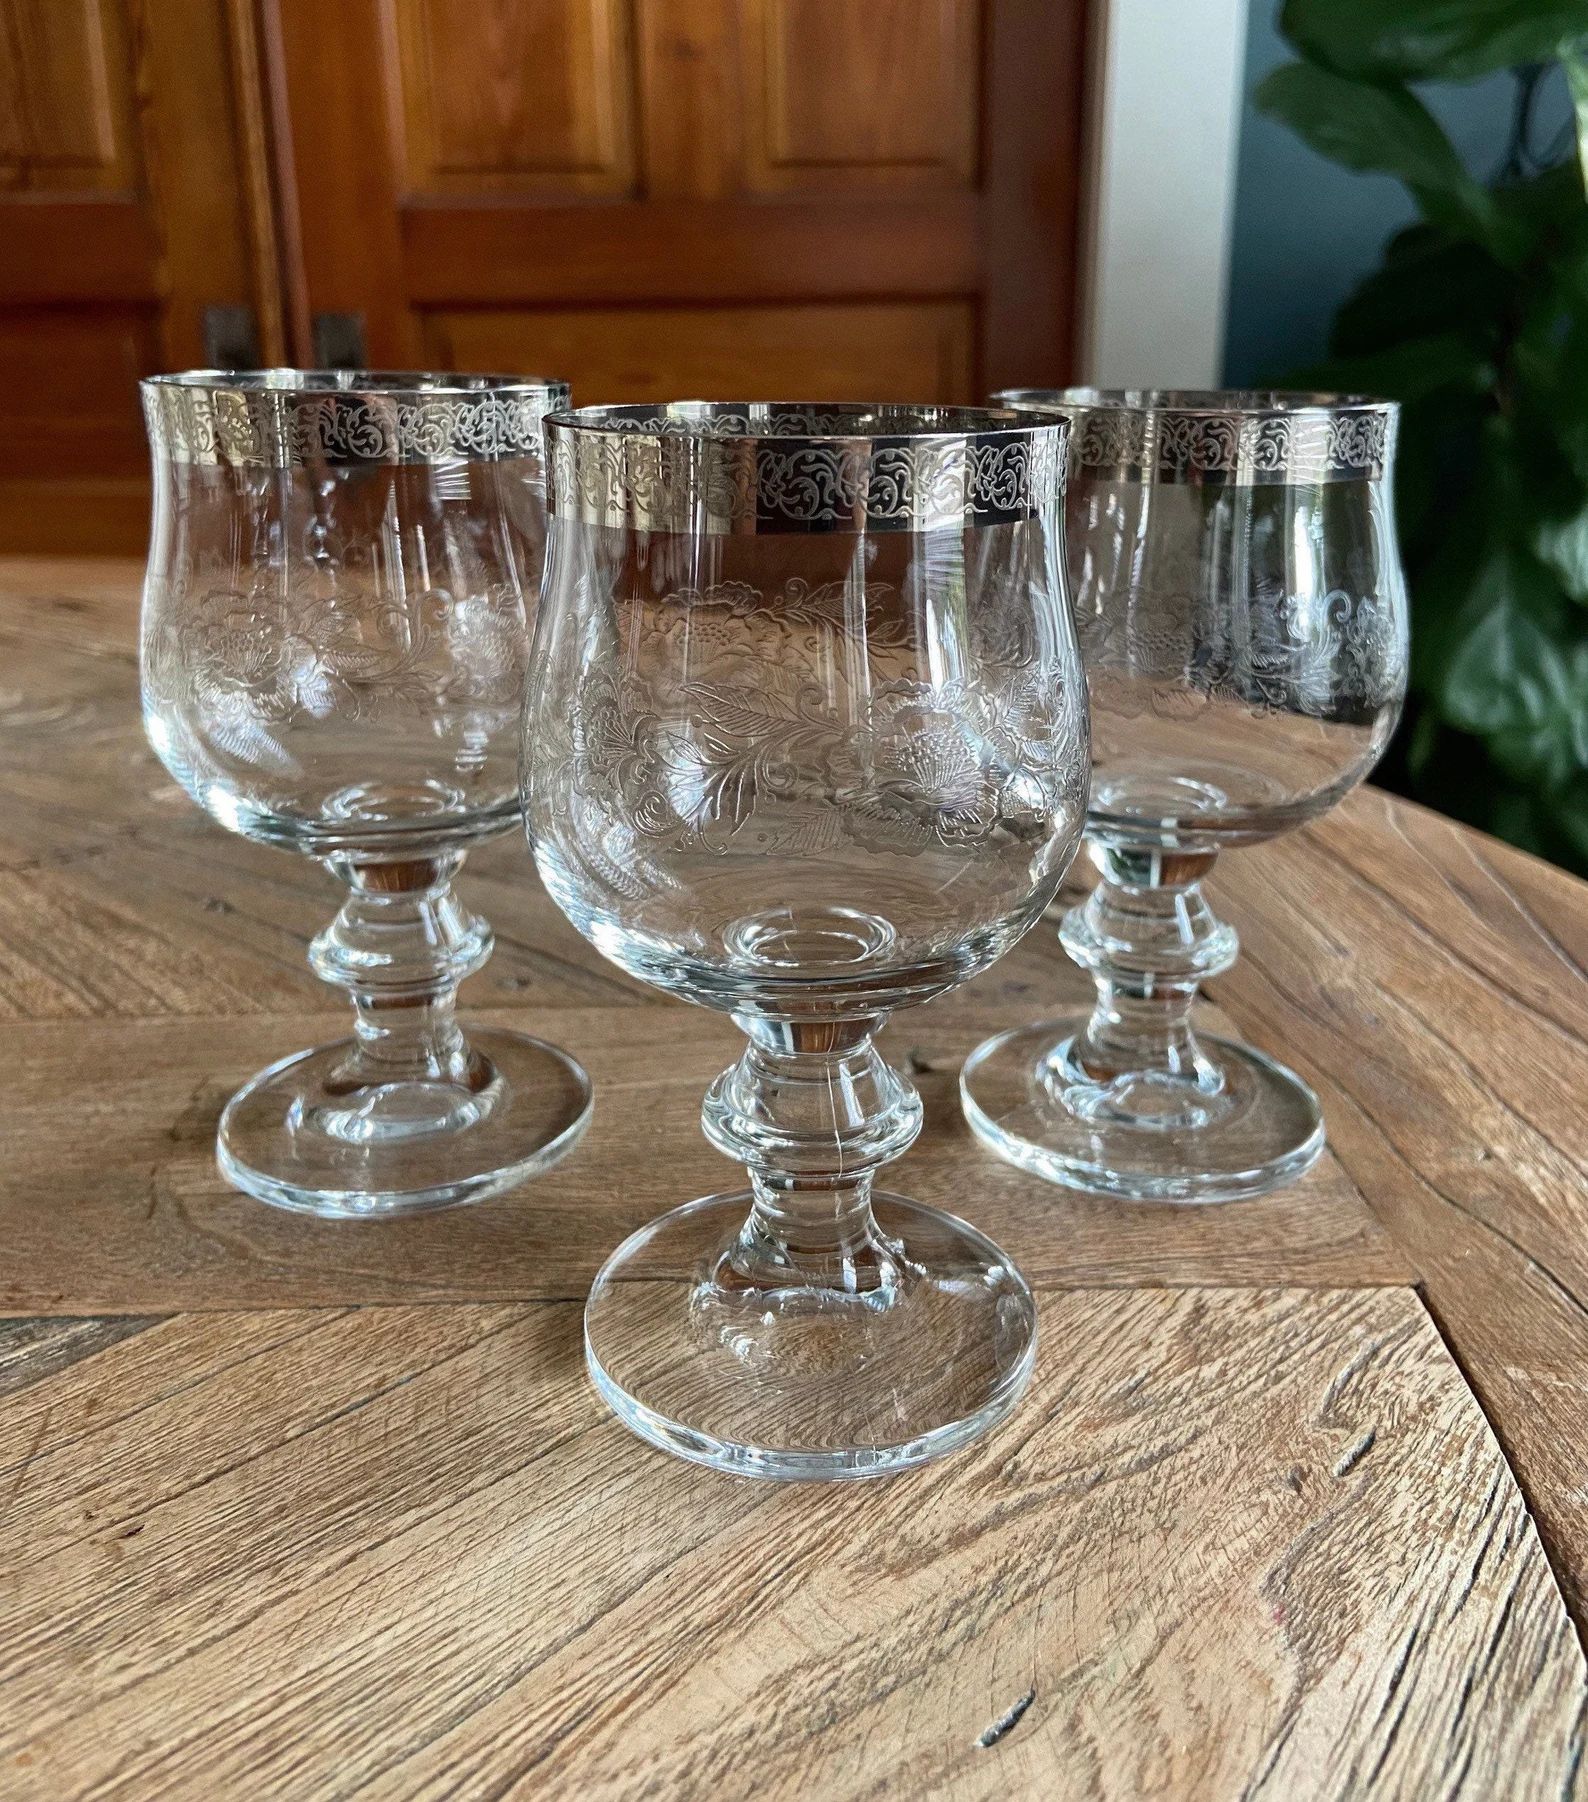 Vintage Etched Glass Wine Glasses With Silver Rims | Etsy (US)